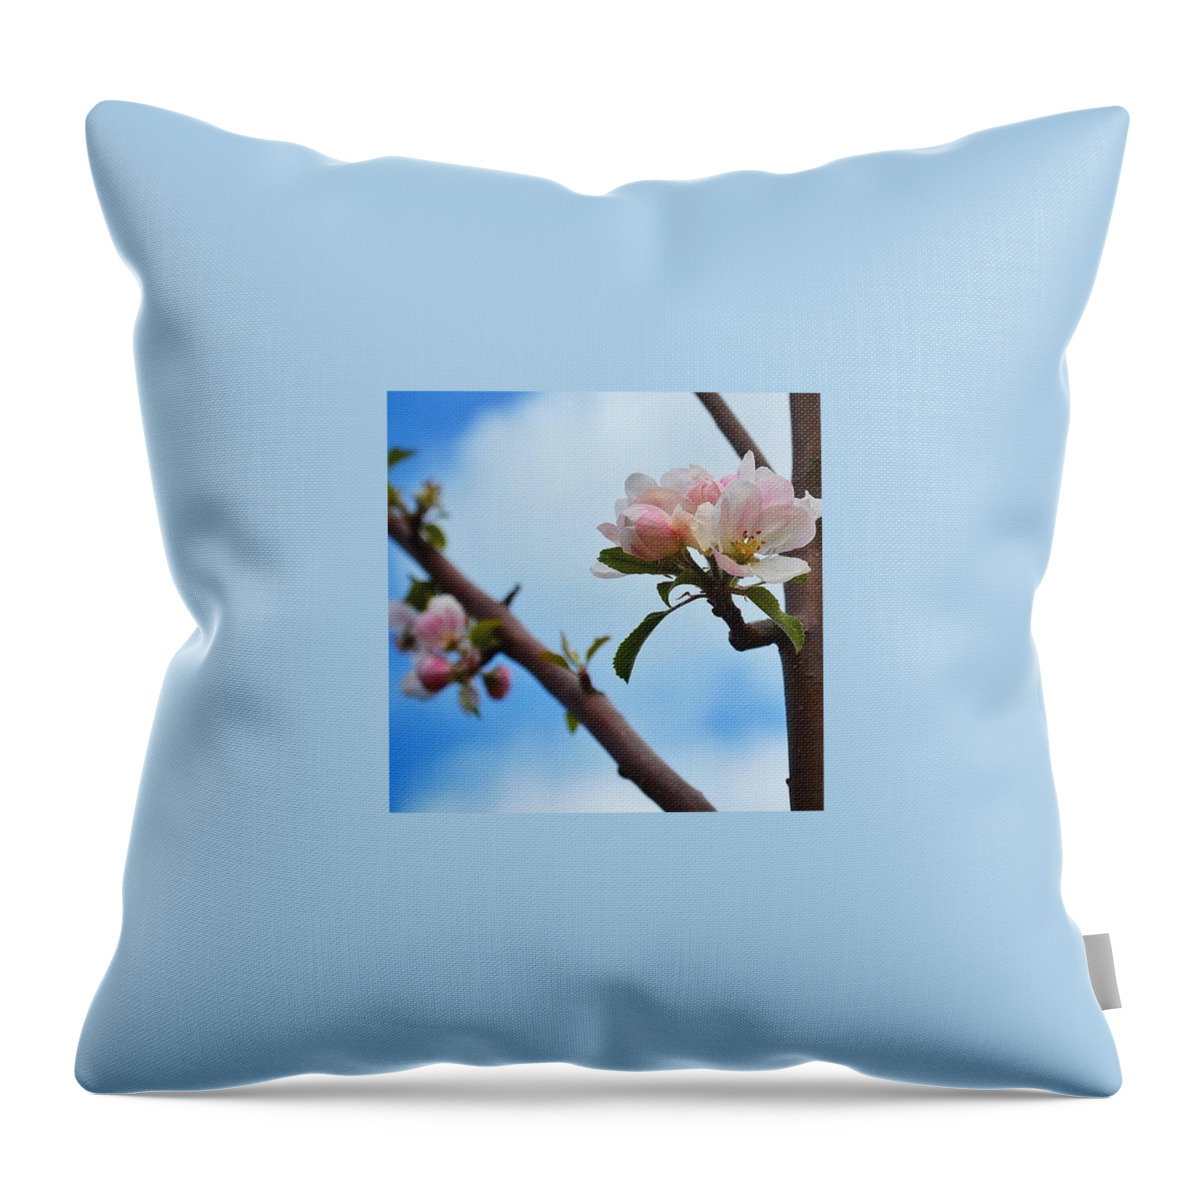 Instaaaaah Throw Pillow featuring the photograph Apple Blossom In The Sky by Silva Halo